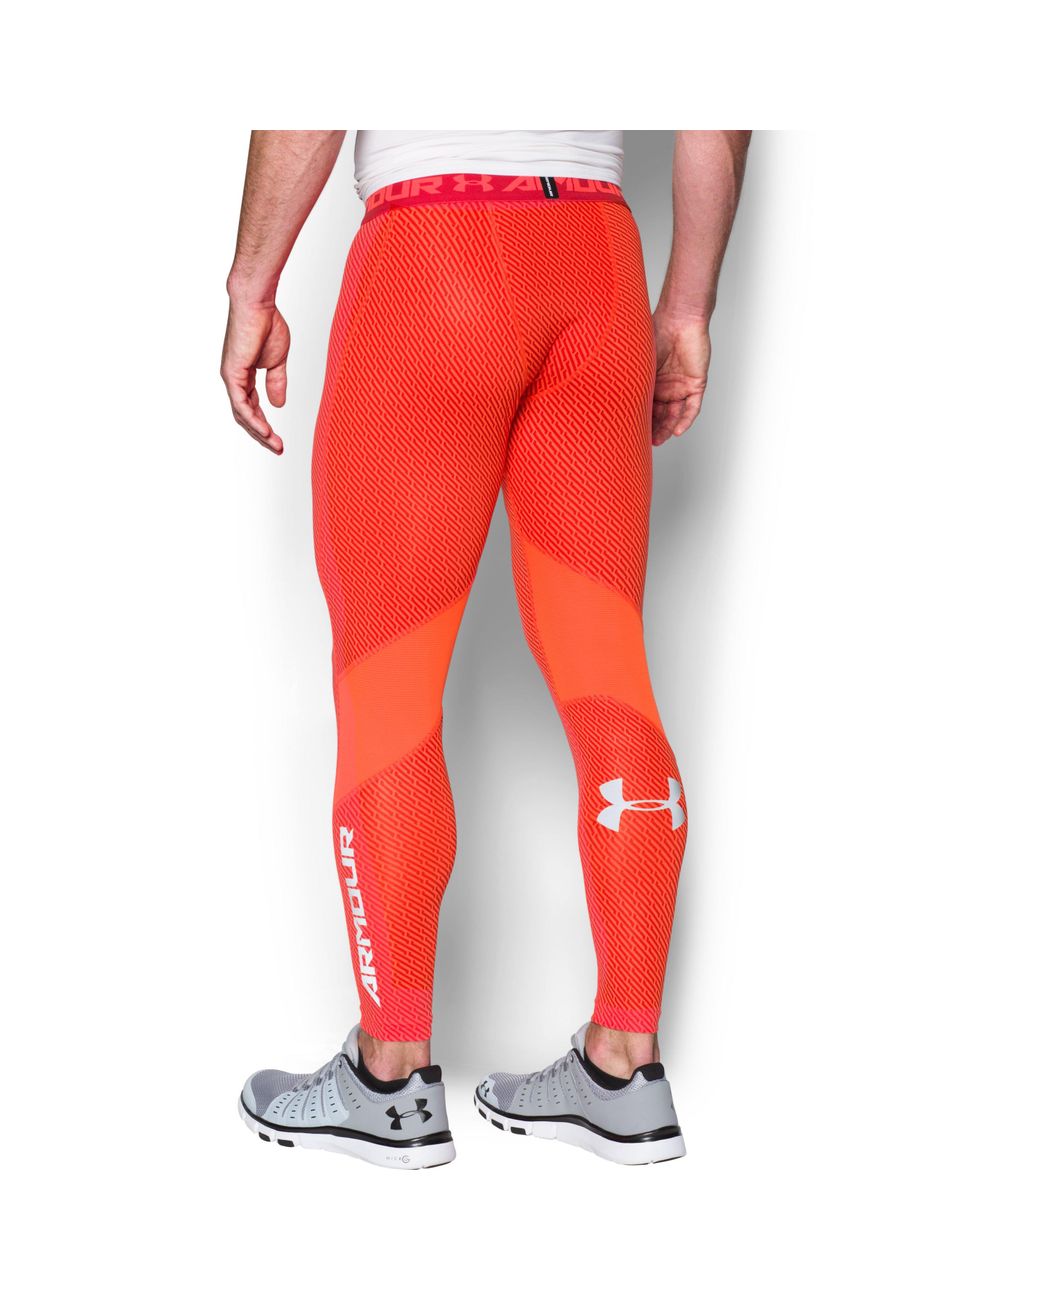 Under Armour Men's Ua Coolswitch Compression Leggings in